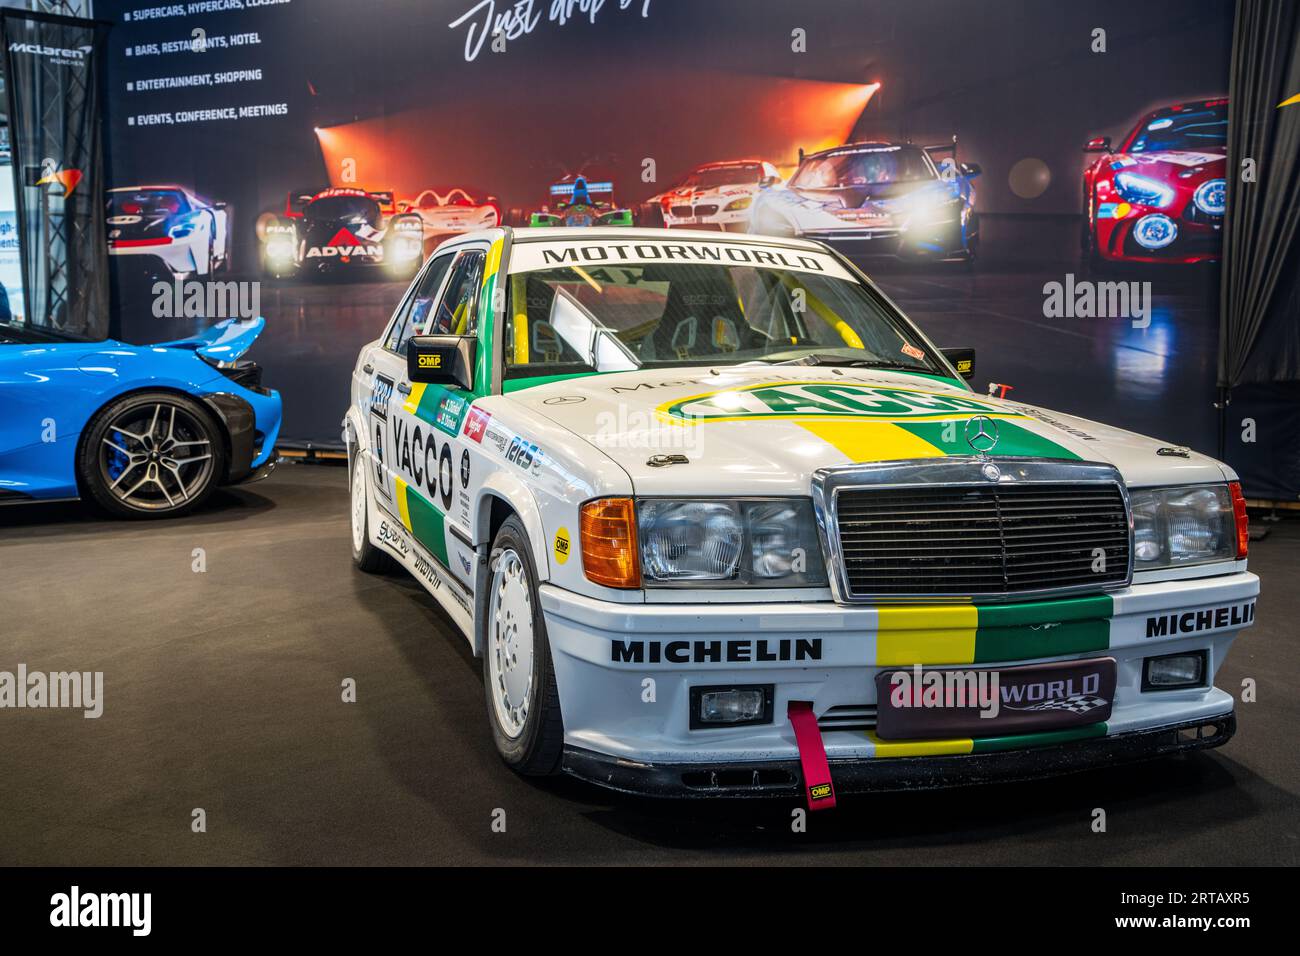 Mercedes-Benz 190E on a stand advertising the Motorworld event at IAA Mobility 2023, Munich Germany. Stock Photo